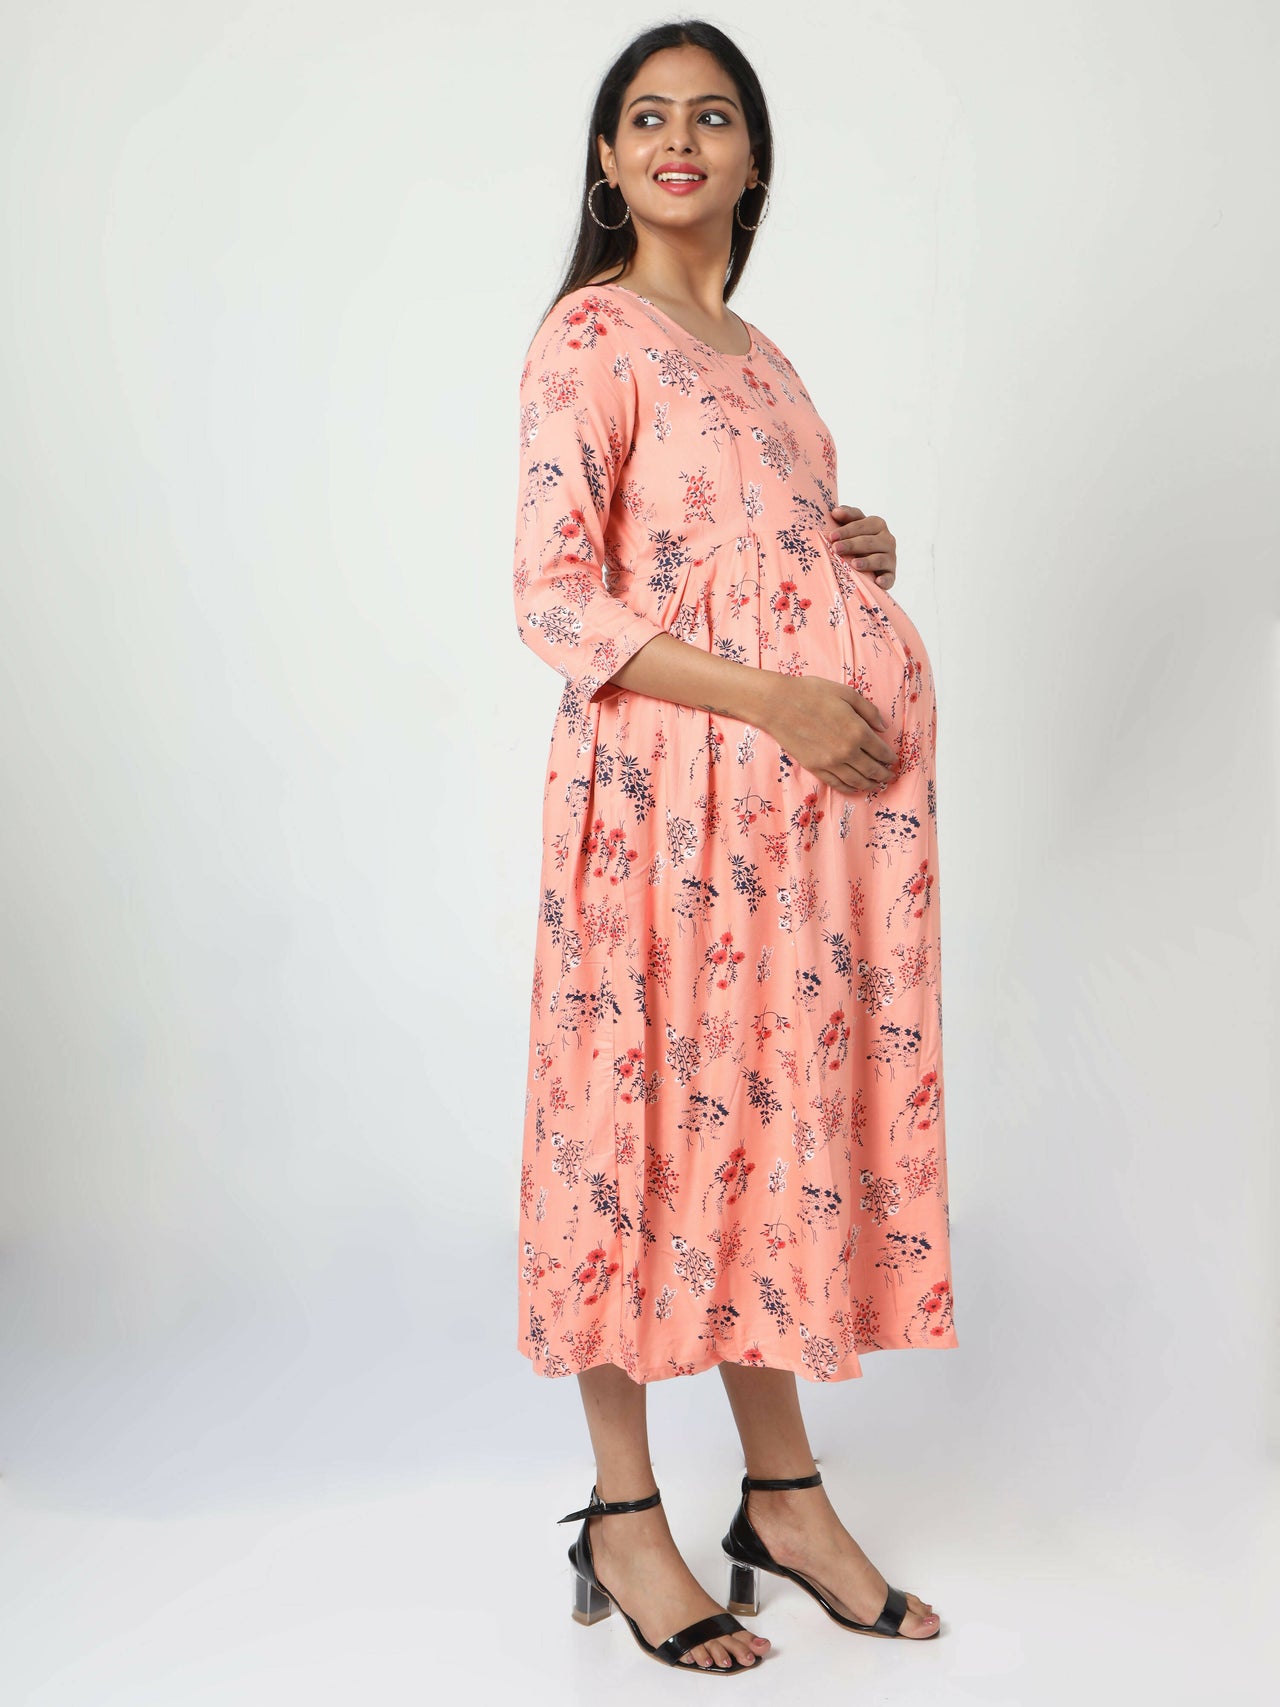 Manet Three Fourth Maternity Dress Floral Print With Concealed Zipper Nursing Access - Orange - Distacart